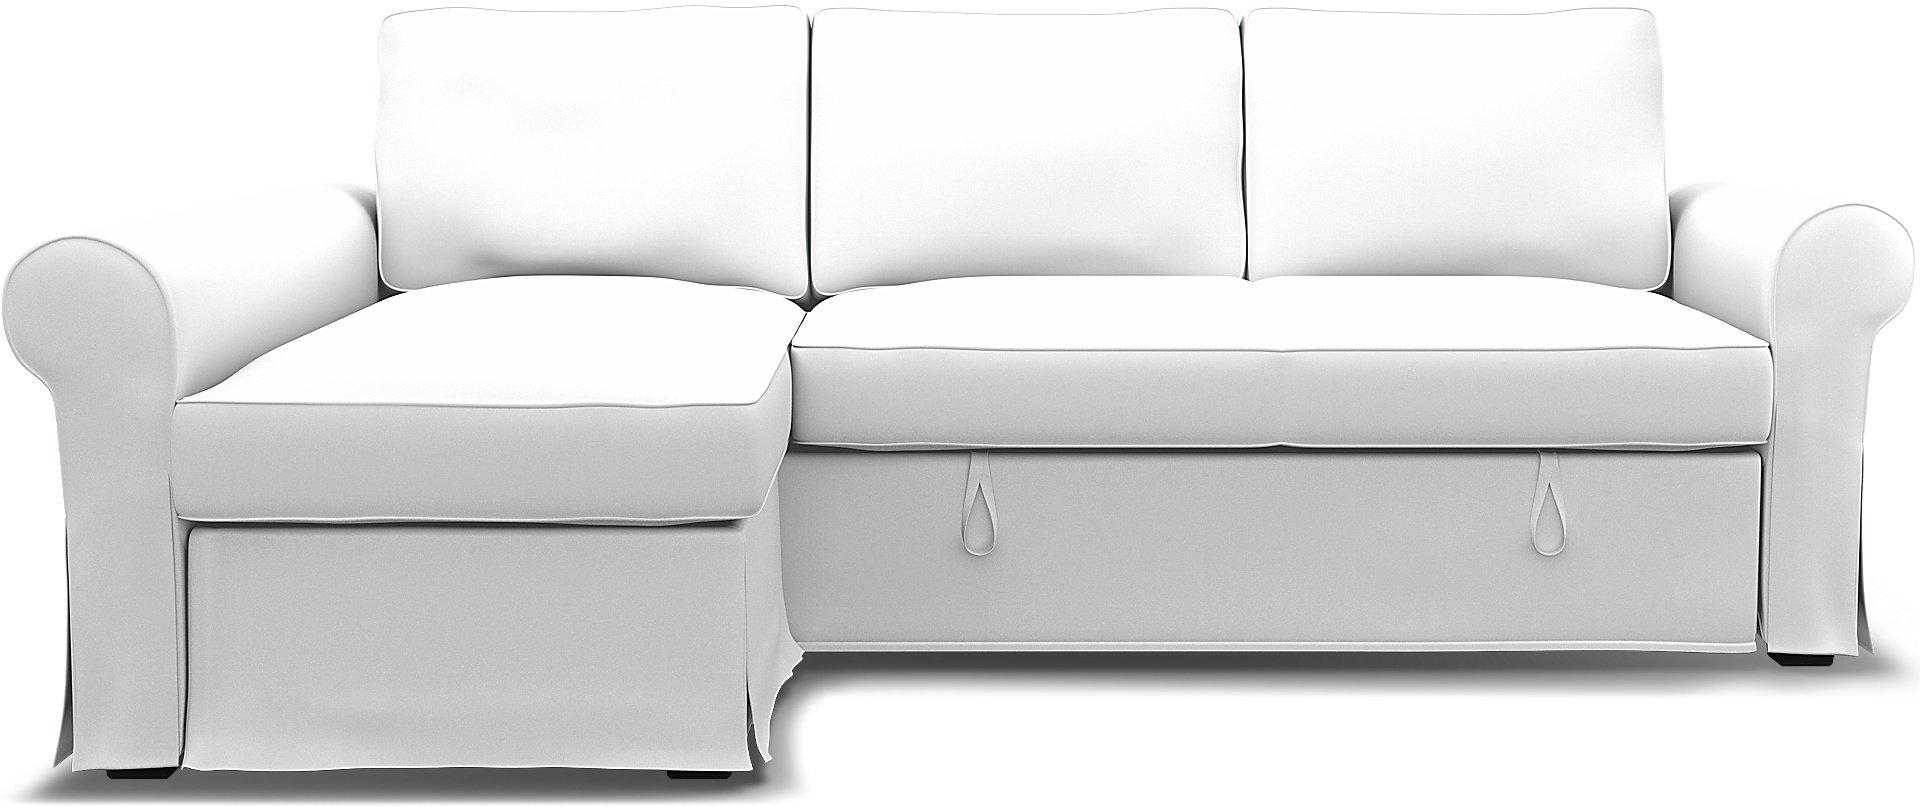 IKEA - Backabro Sofabed with Chaise Cover, Absolute White, Cotton - Bemz